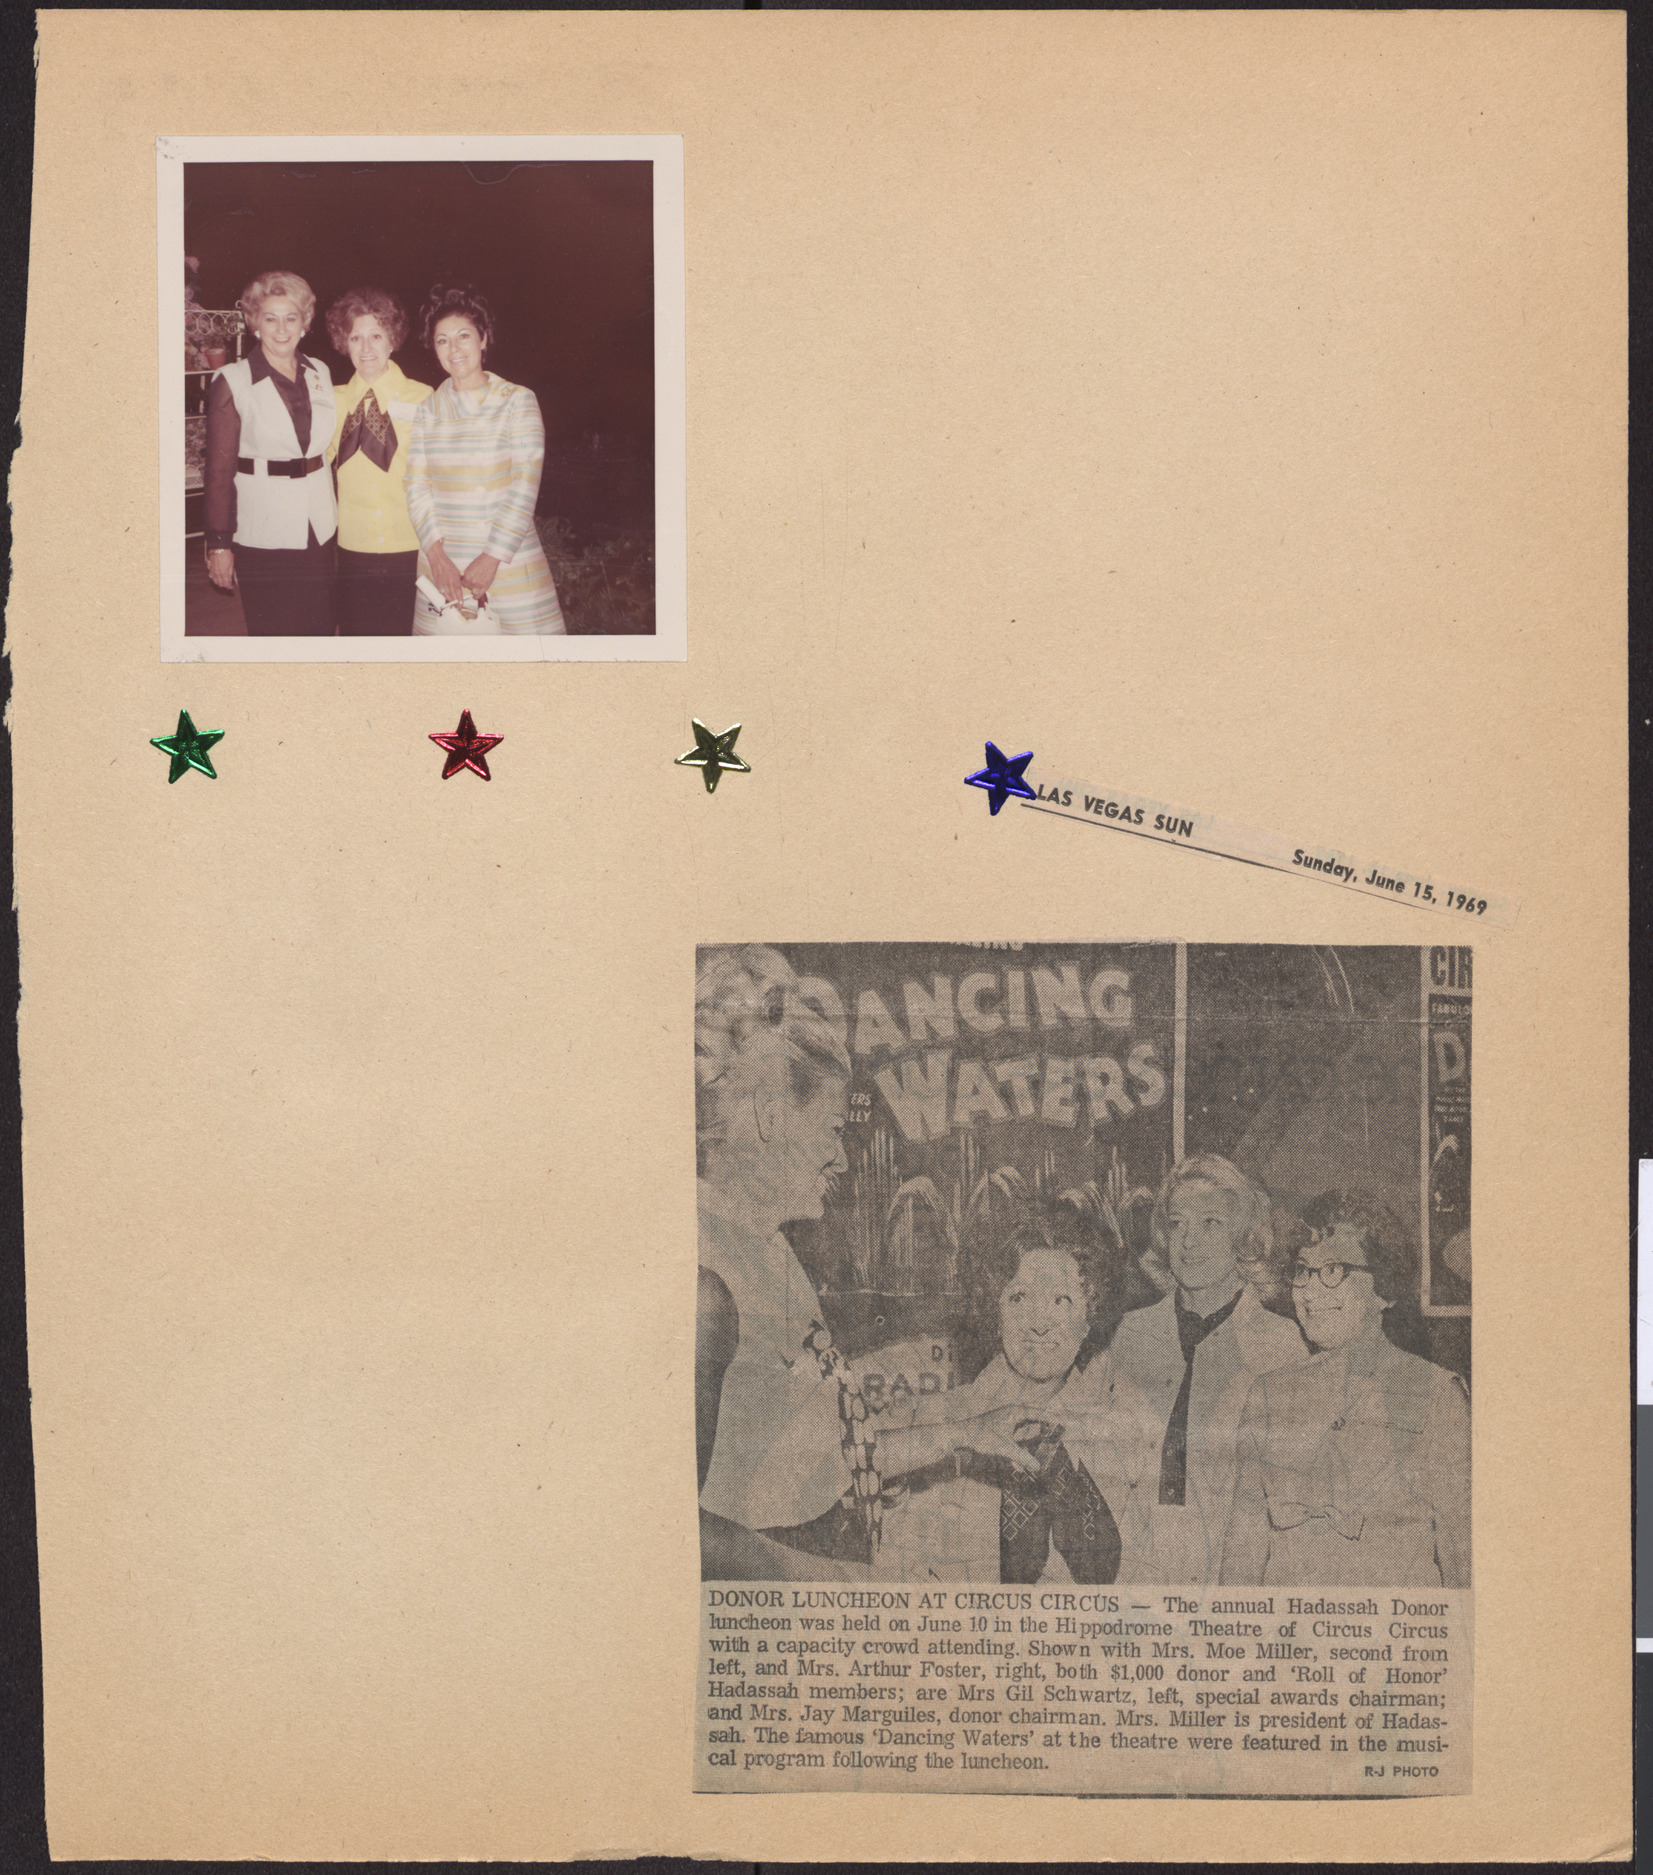 Photograph of three Hadassah members, and newspaper clipping, Donor luncheon at Circus Circus, Las Vegas Sun, June 15, 1969